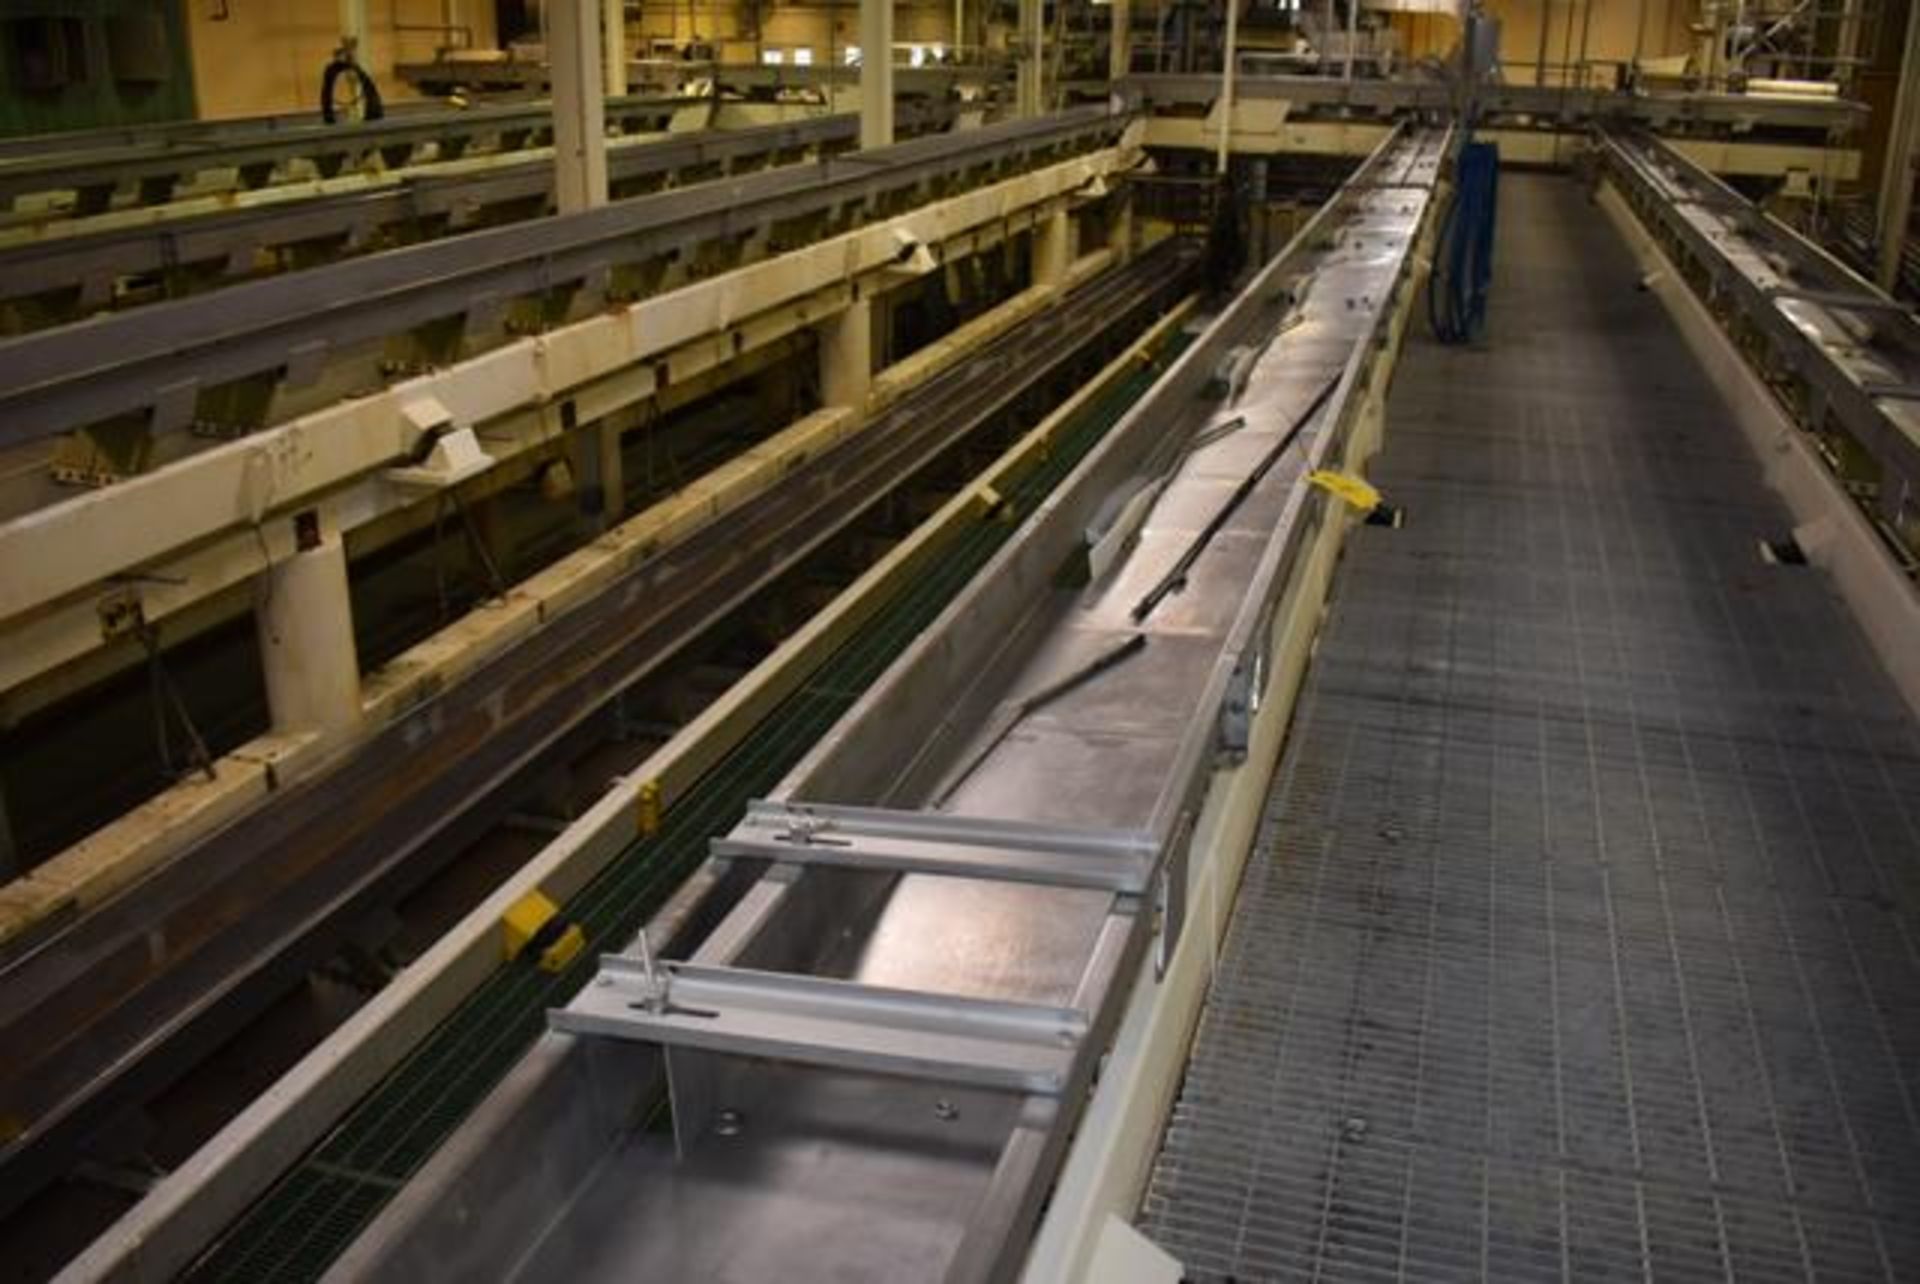 (Located in Sleepy Eye, MN) Commercial Vibratory Oscillating Shaker Conveyor, Approx. 72' Length x - Image 2 of 2